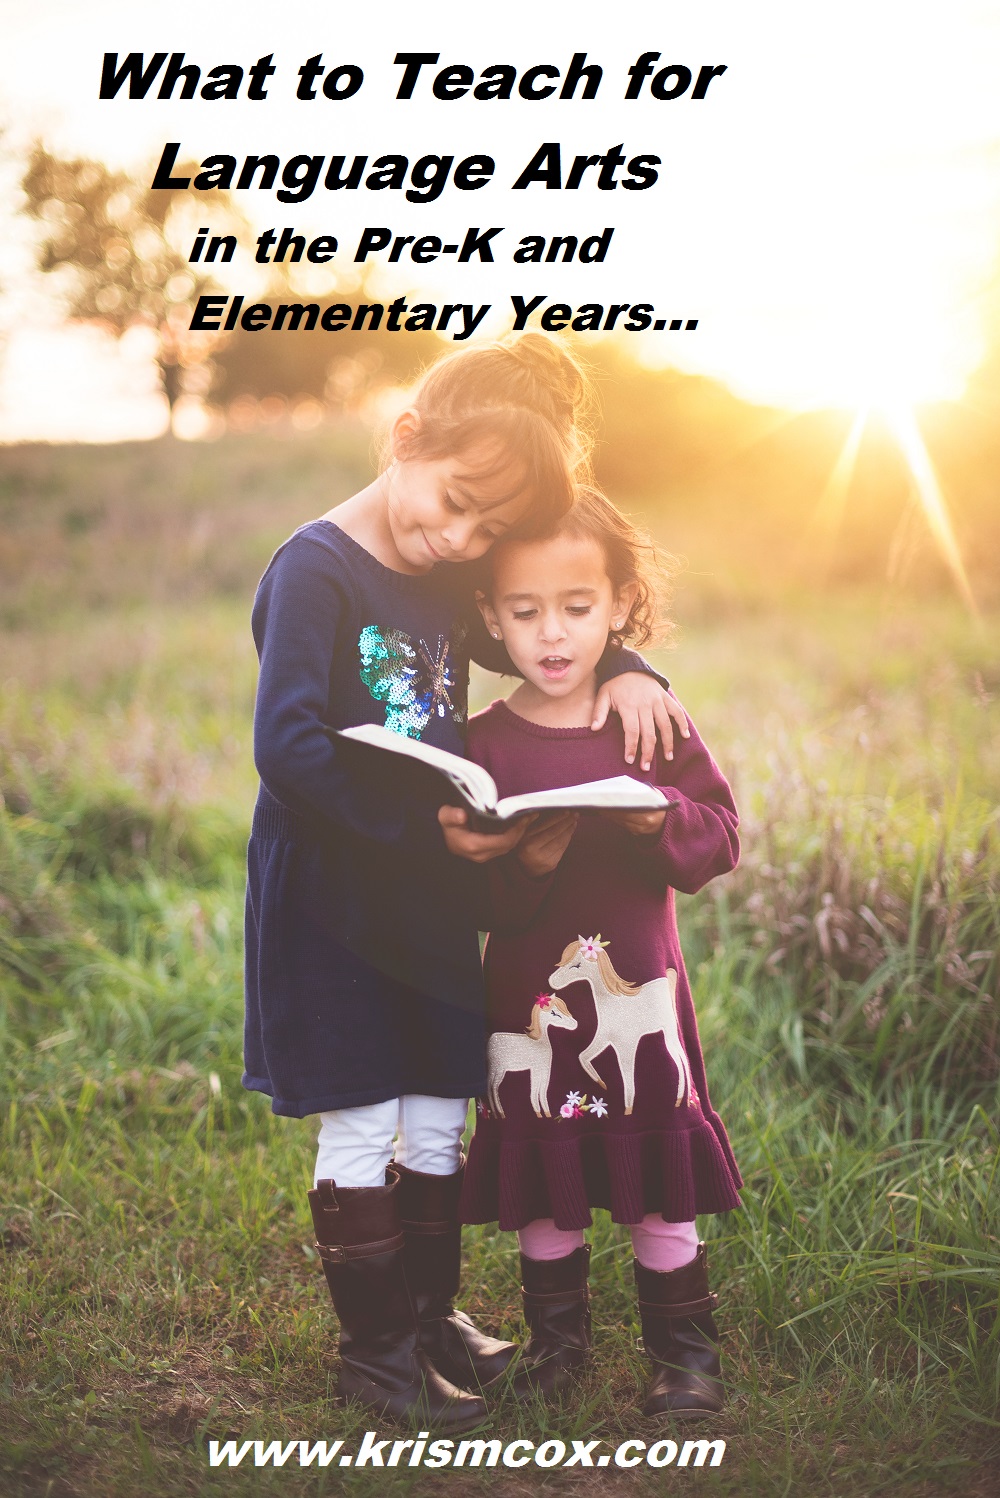 What to Teach for Language Arts in the Pre-K & Elementary Years